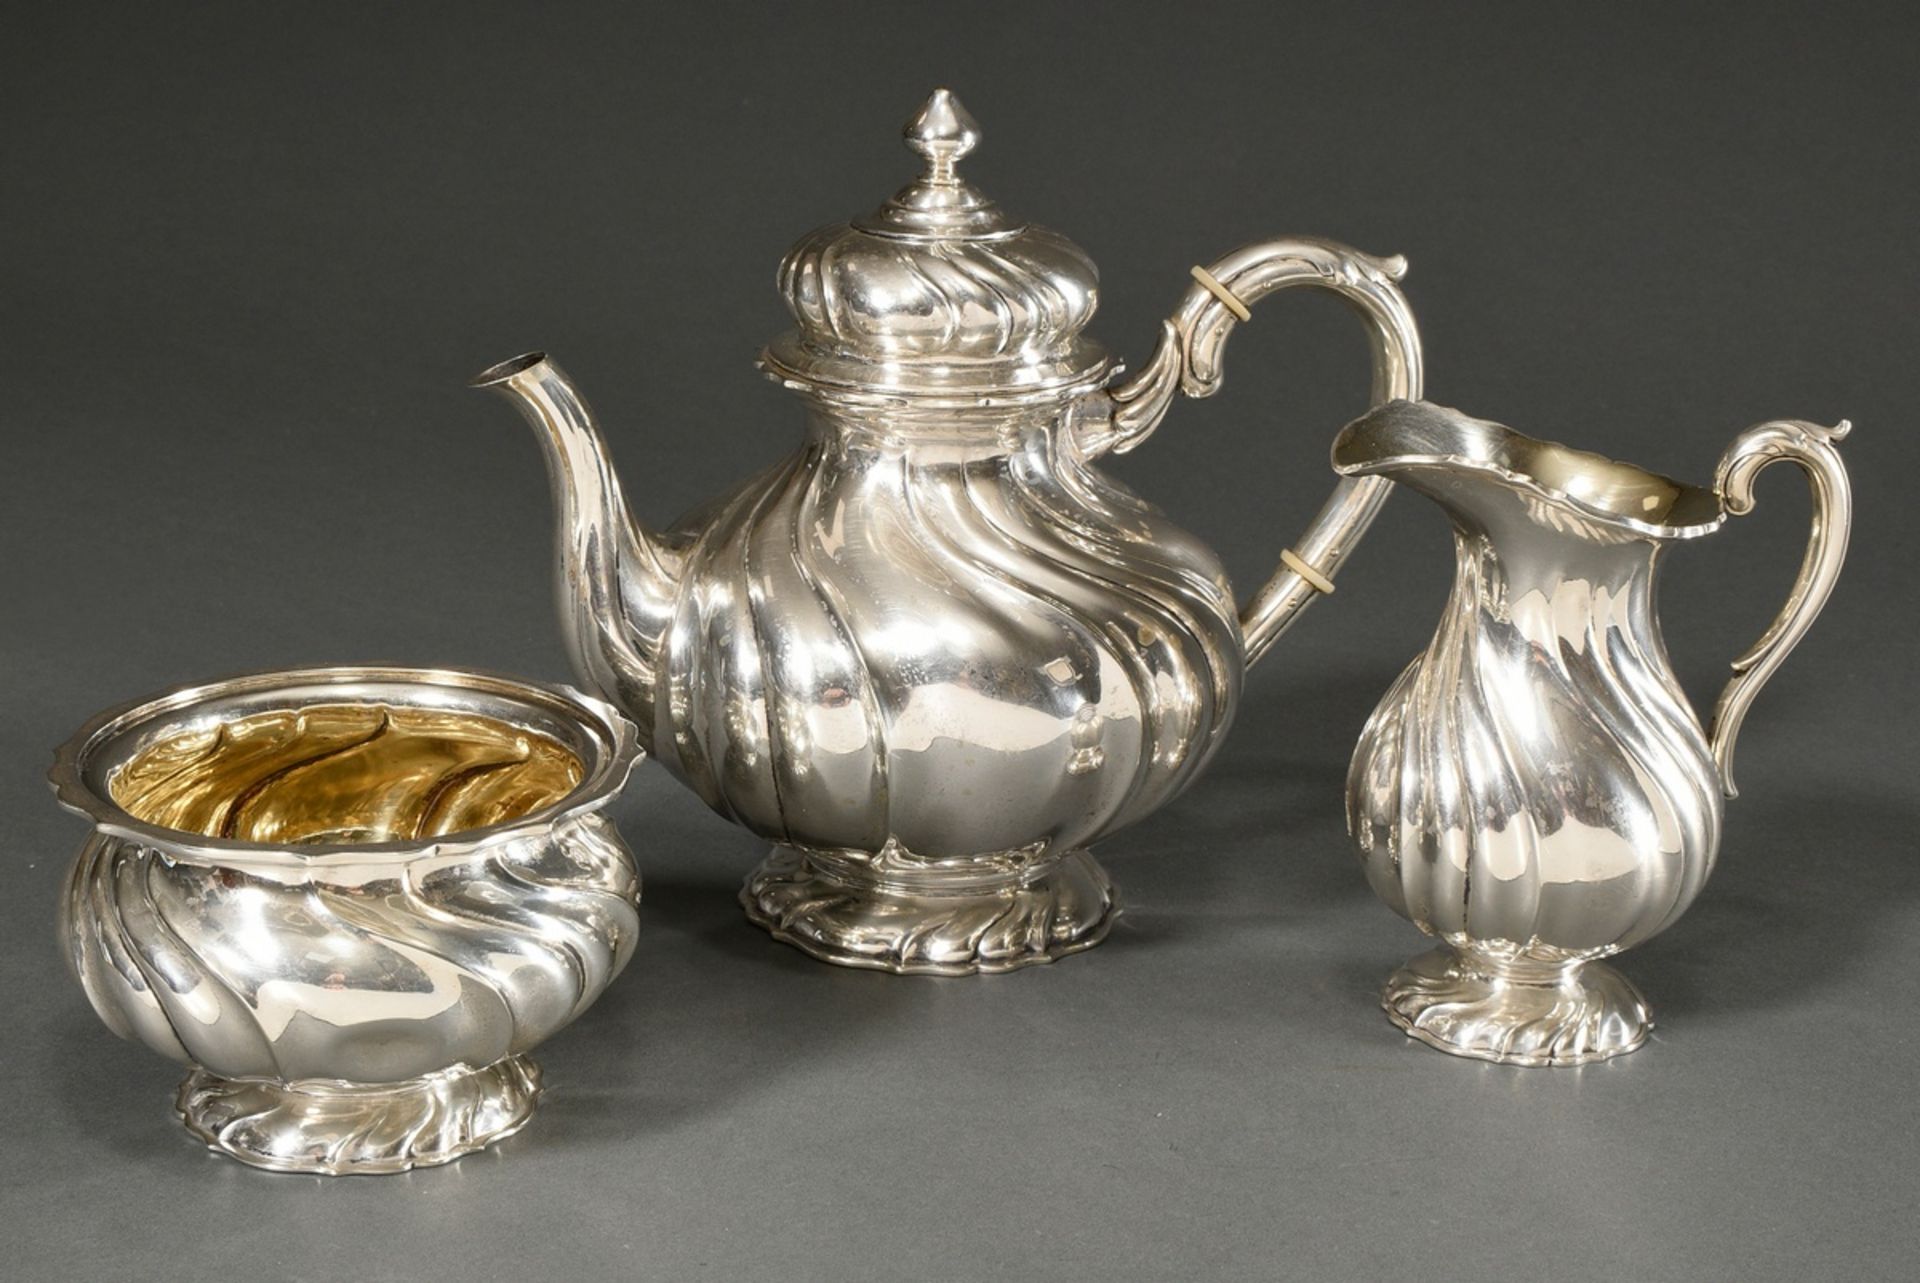 3 Piece tea service with gadrooned body in baroque façon, Wilkens, jeweller's mark: O. Breede, silv